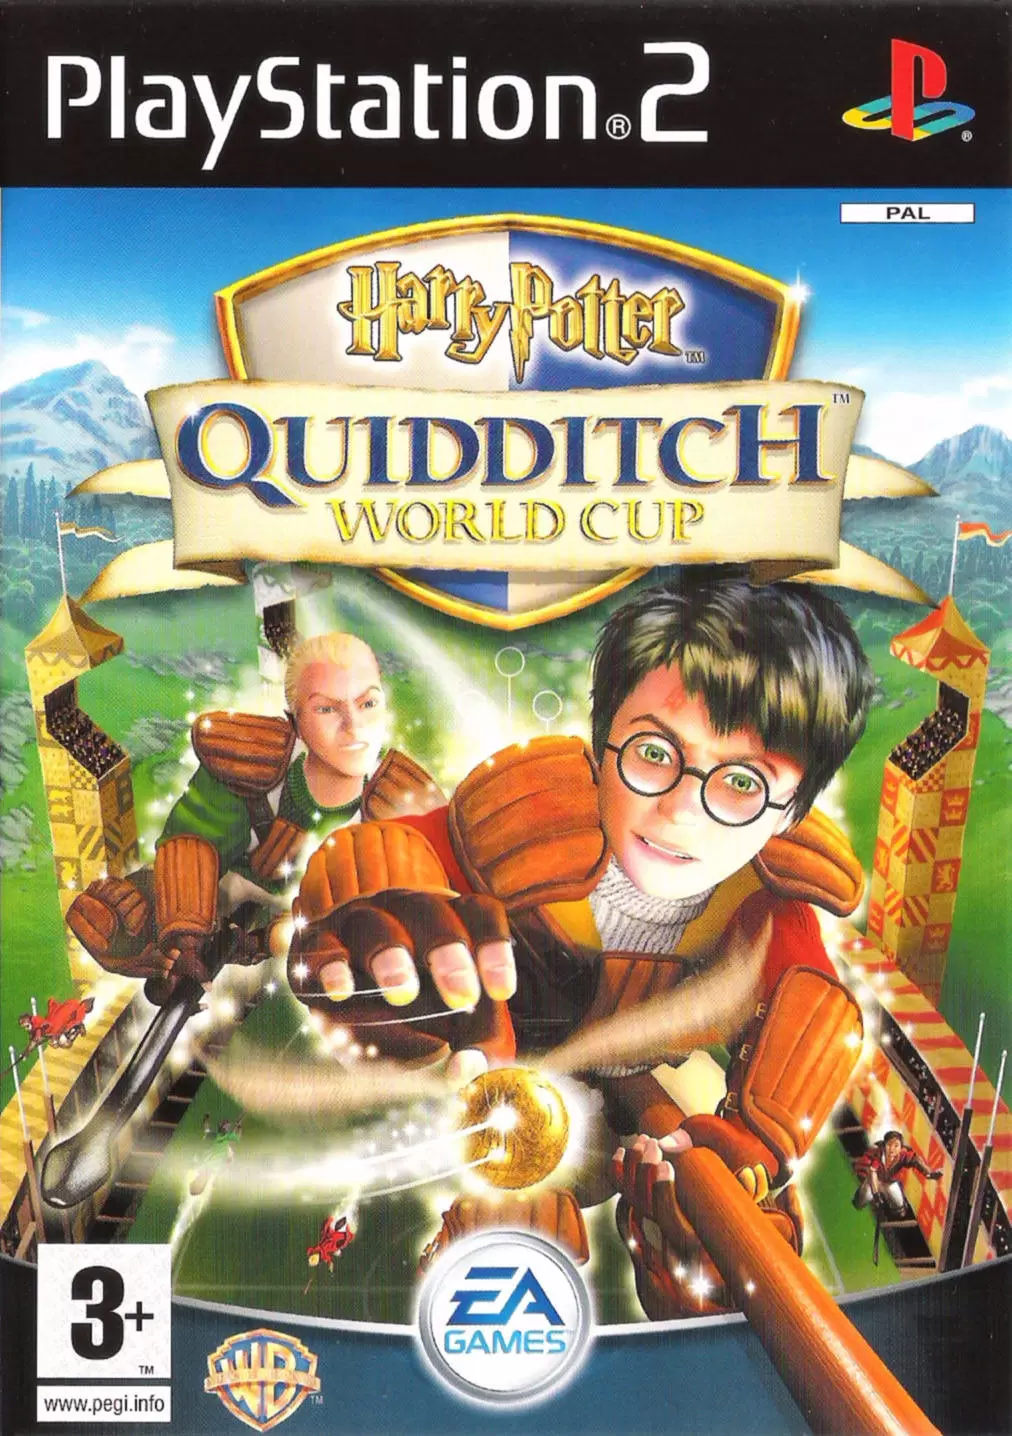 PS2 Games - Harry Potter: Quidditch World Cup